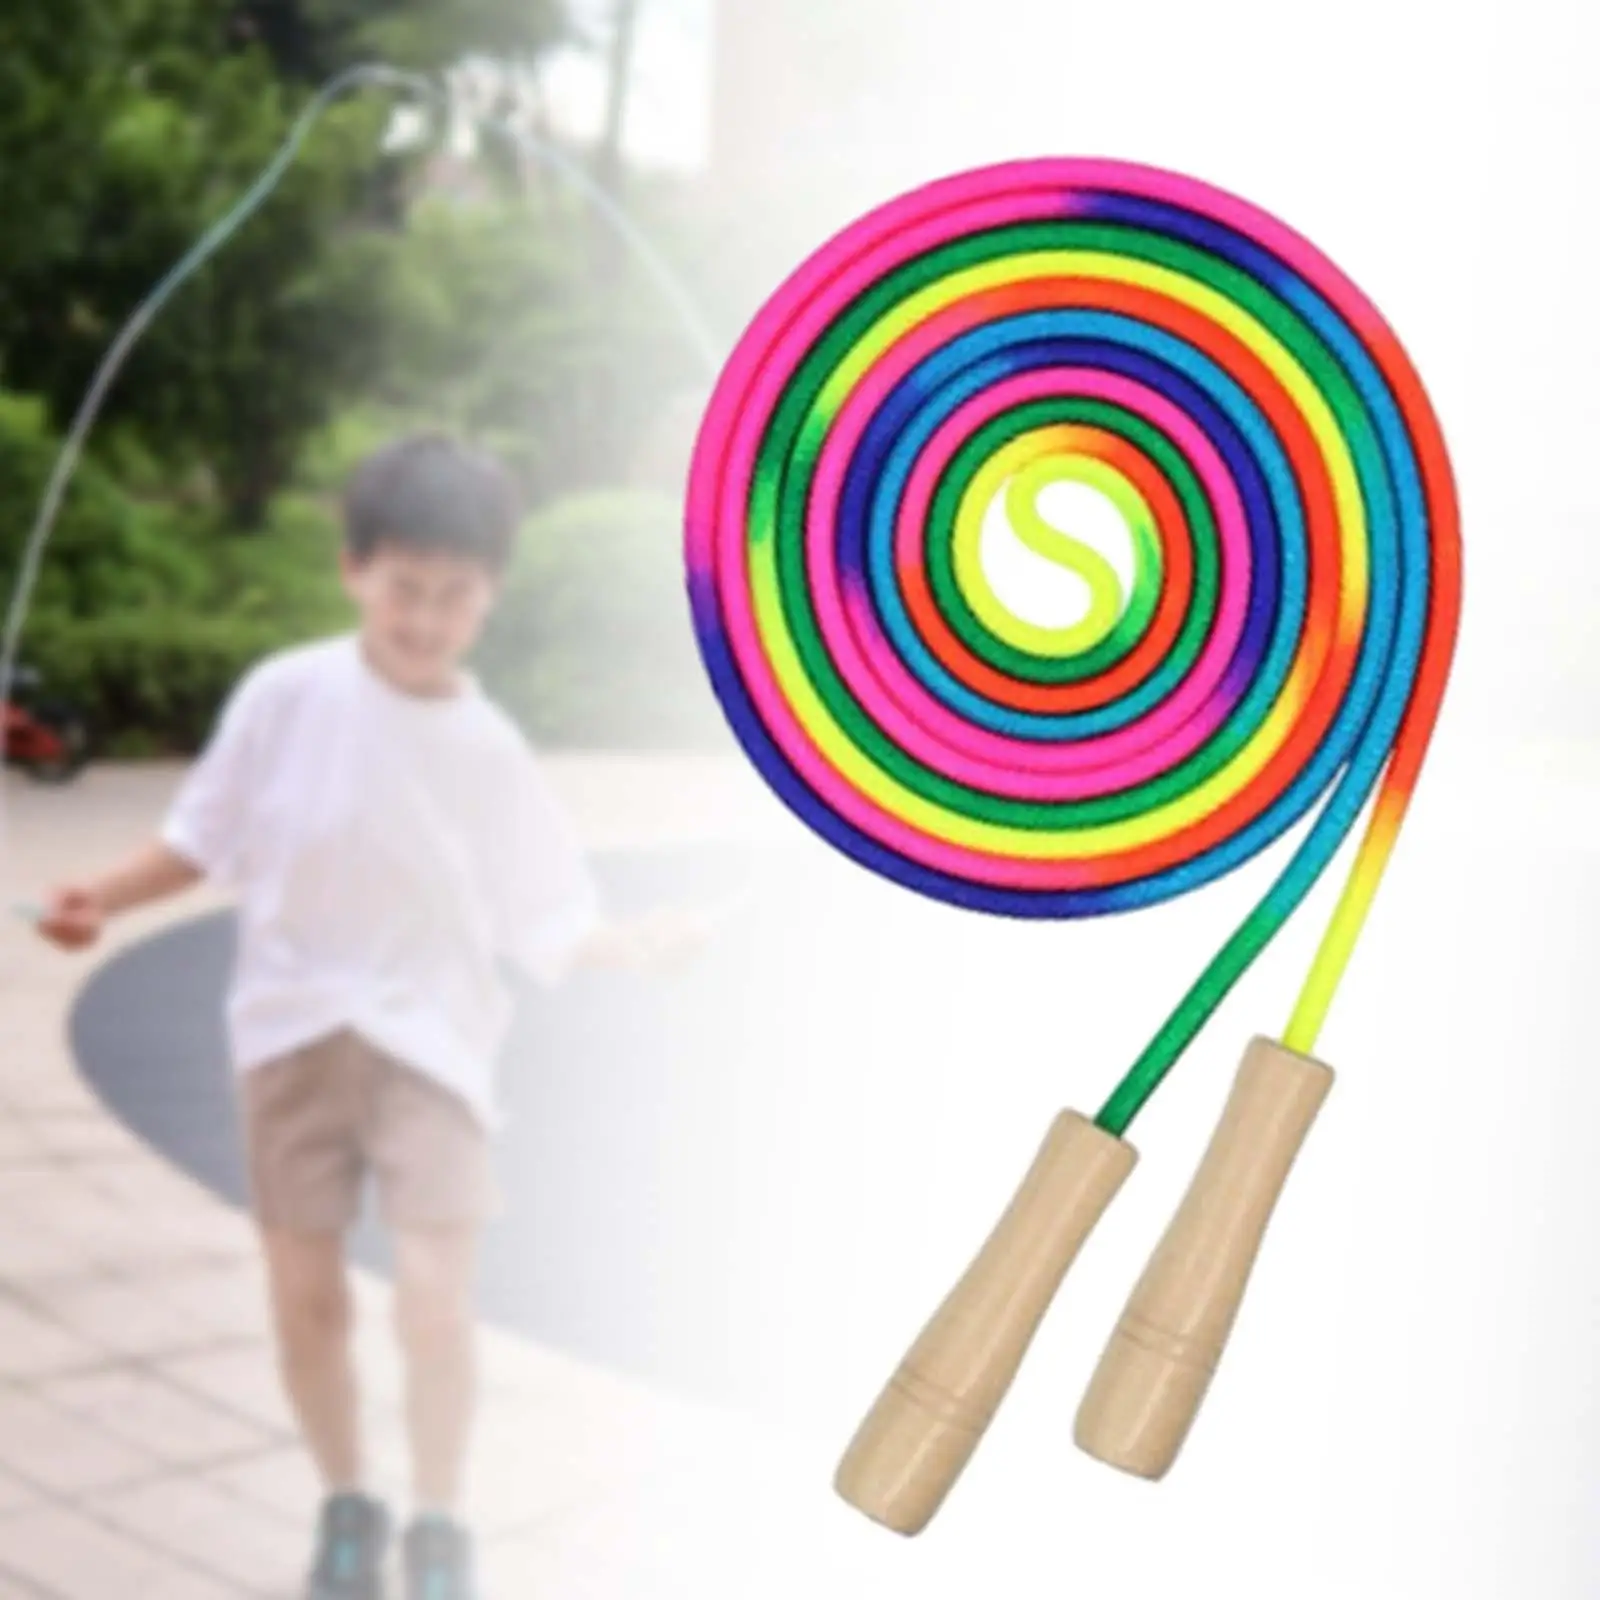 Jump Rope Fun Activities Durable Portable Wooden Handles Skipping Rope for